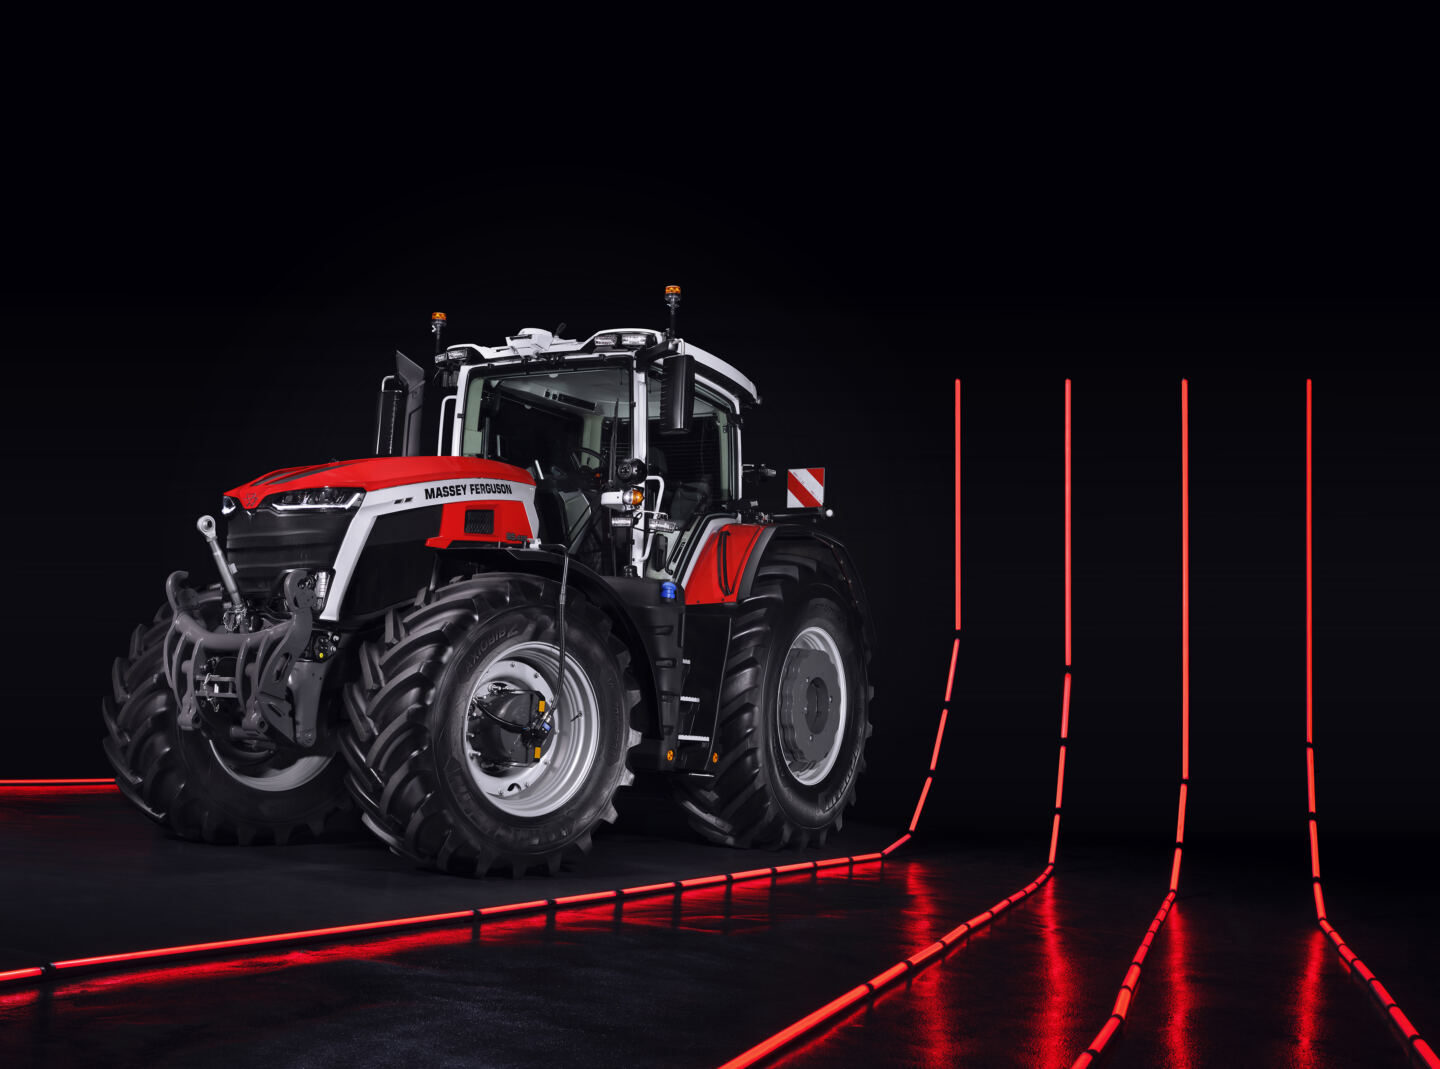 An exclusive look at the 8S tractor Massey Ferguson just launched